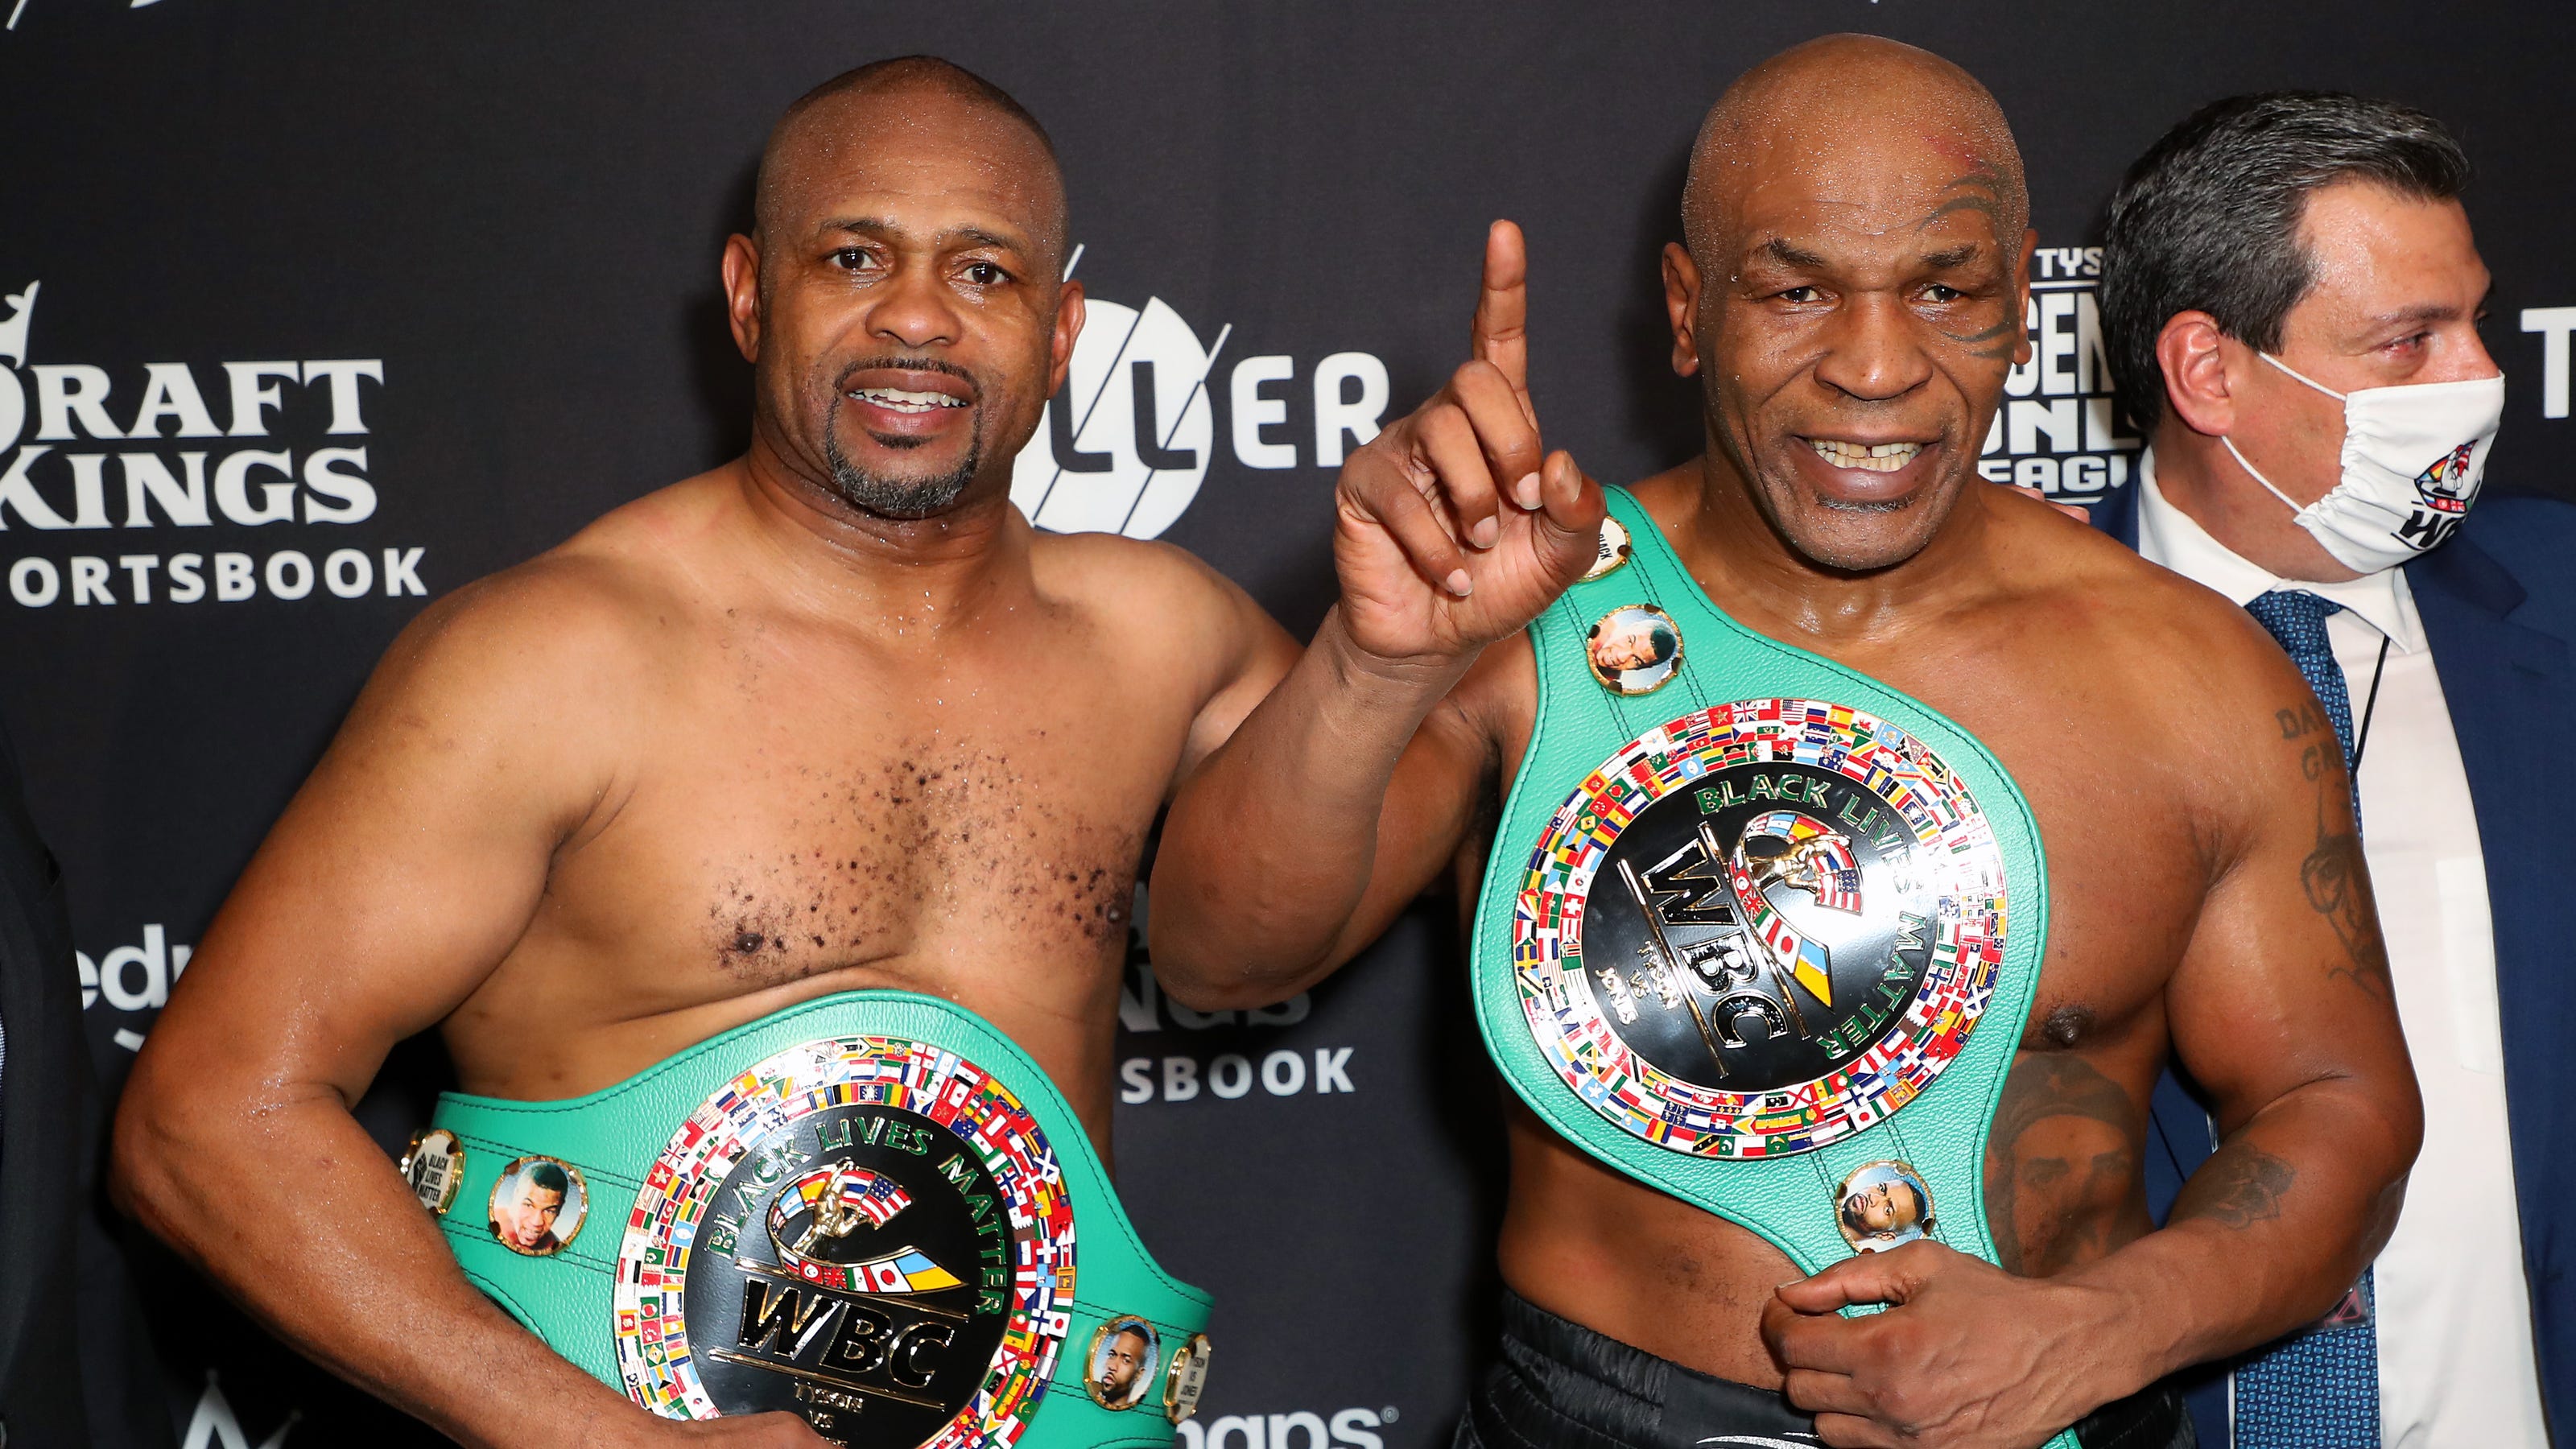 Mike Tyson can fight for heavyweight title, Foreman says